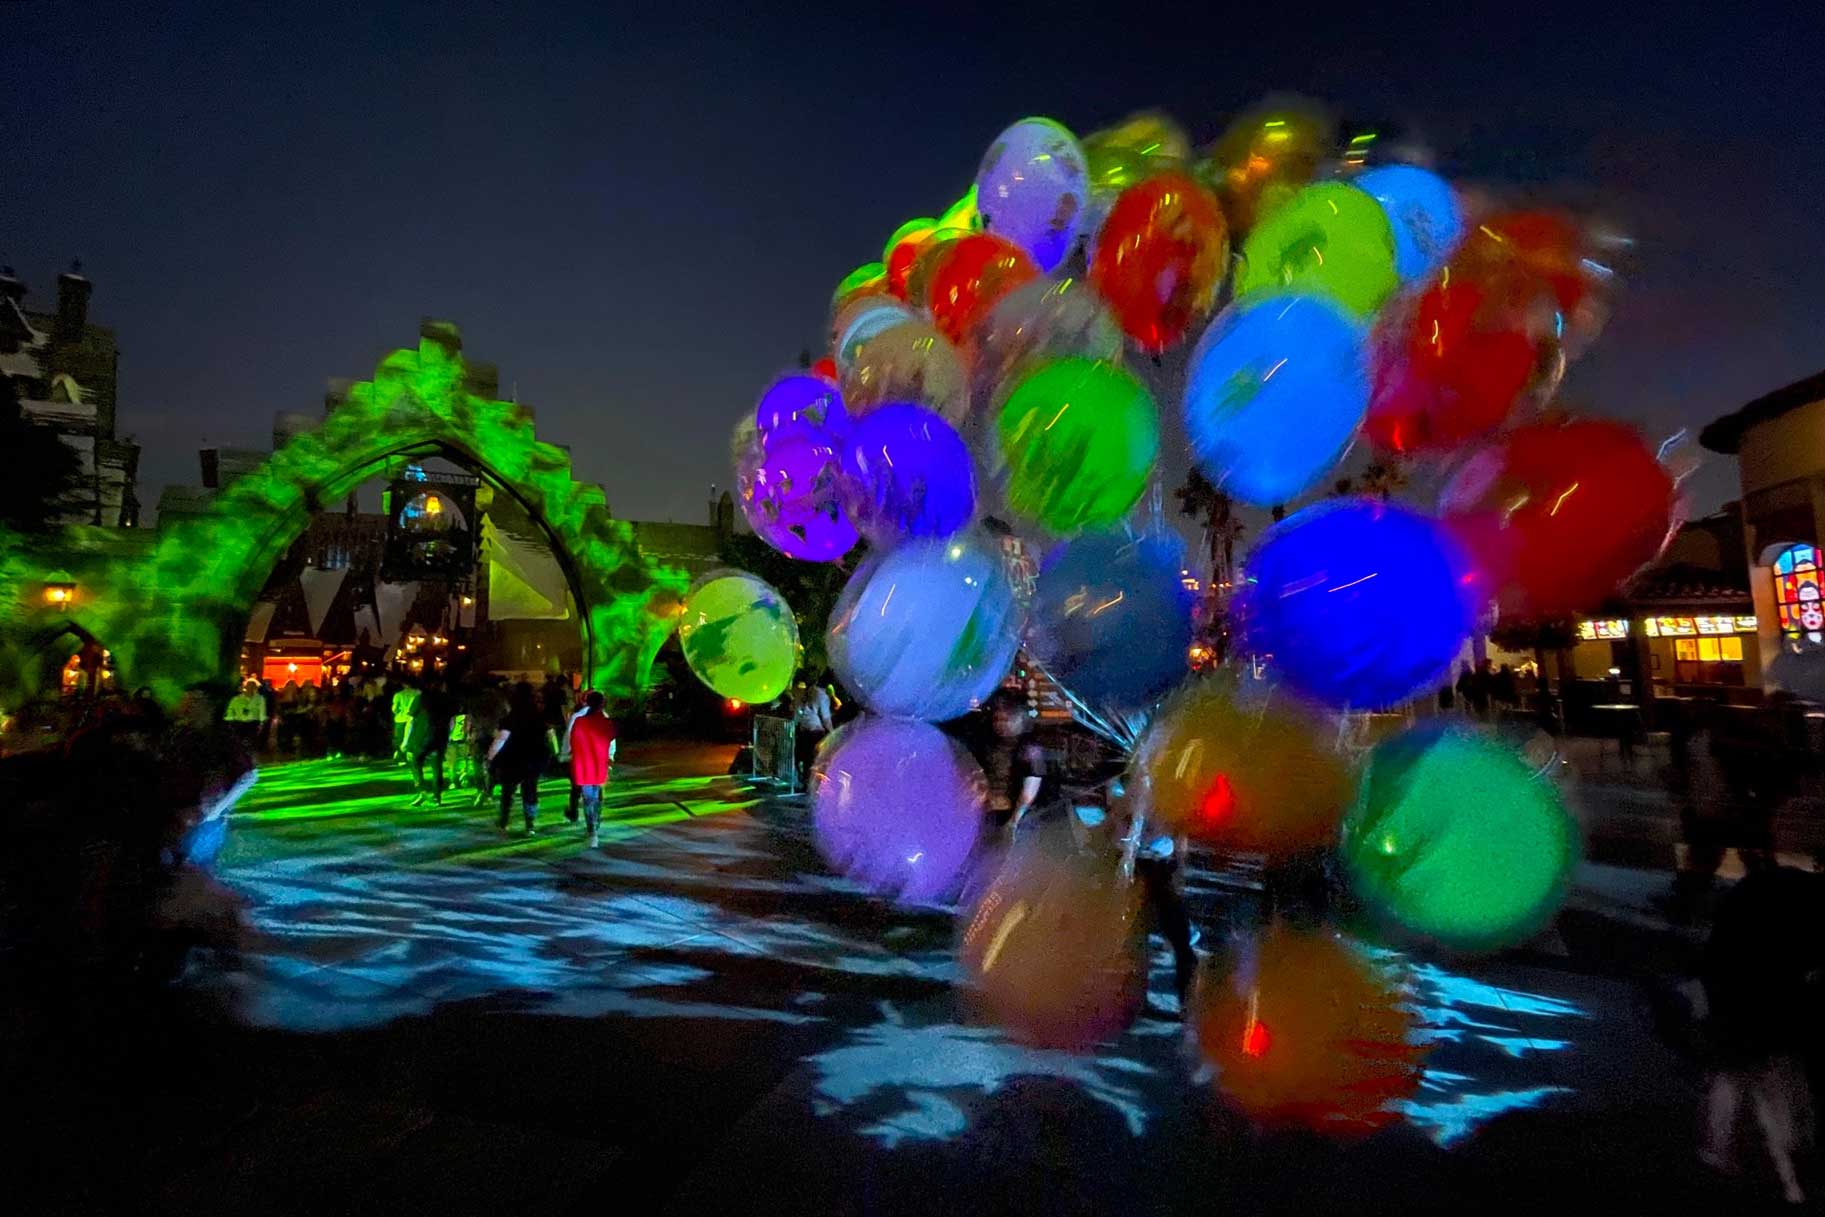 Guests walking down a dark pathway that's lit up green with balloons in the view.